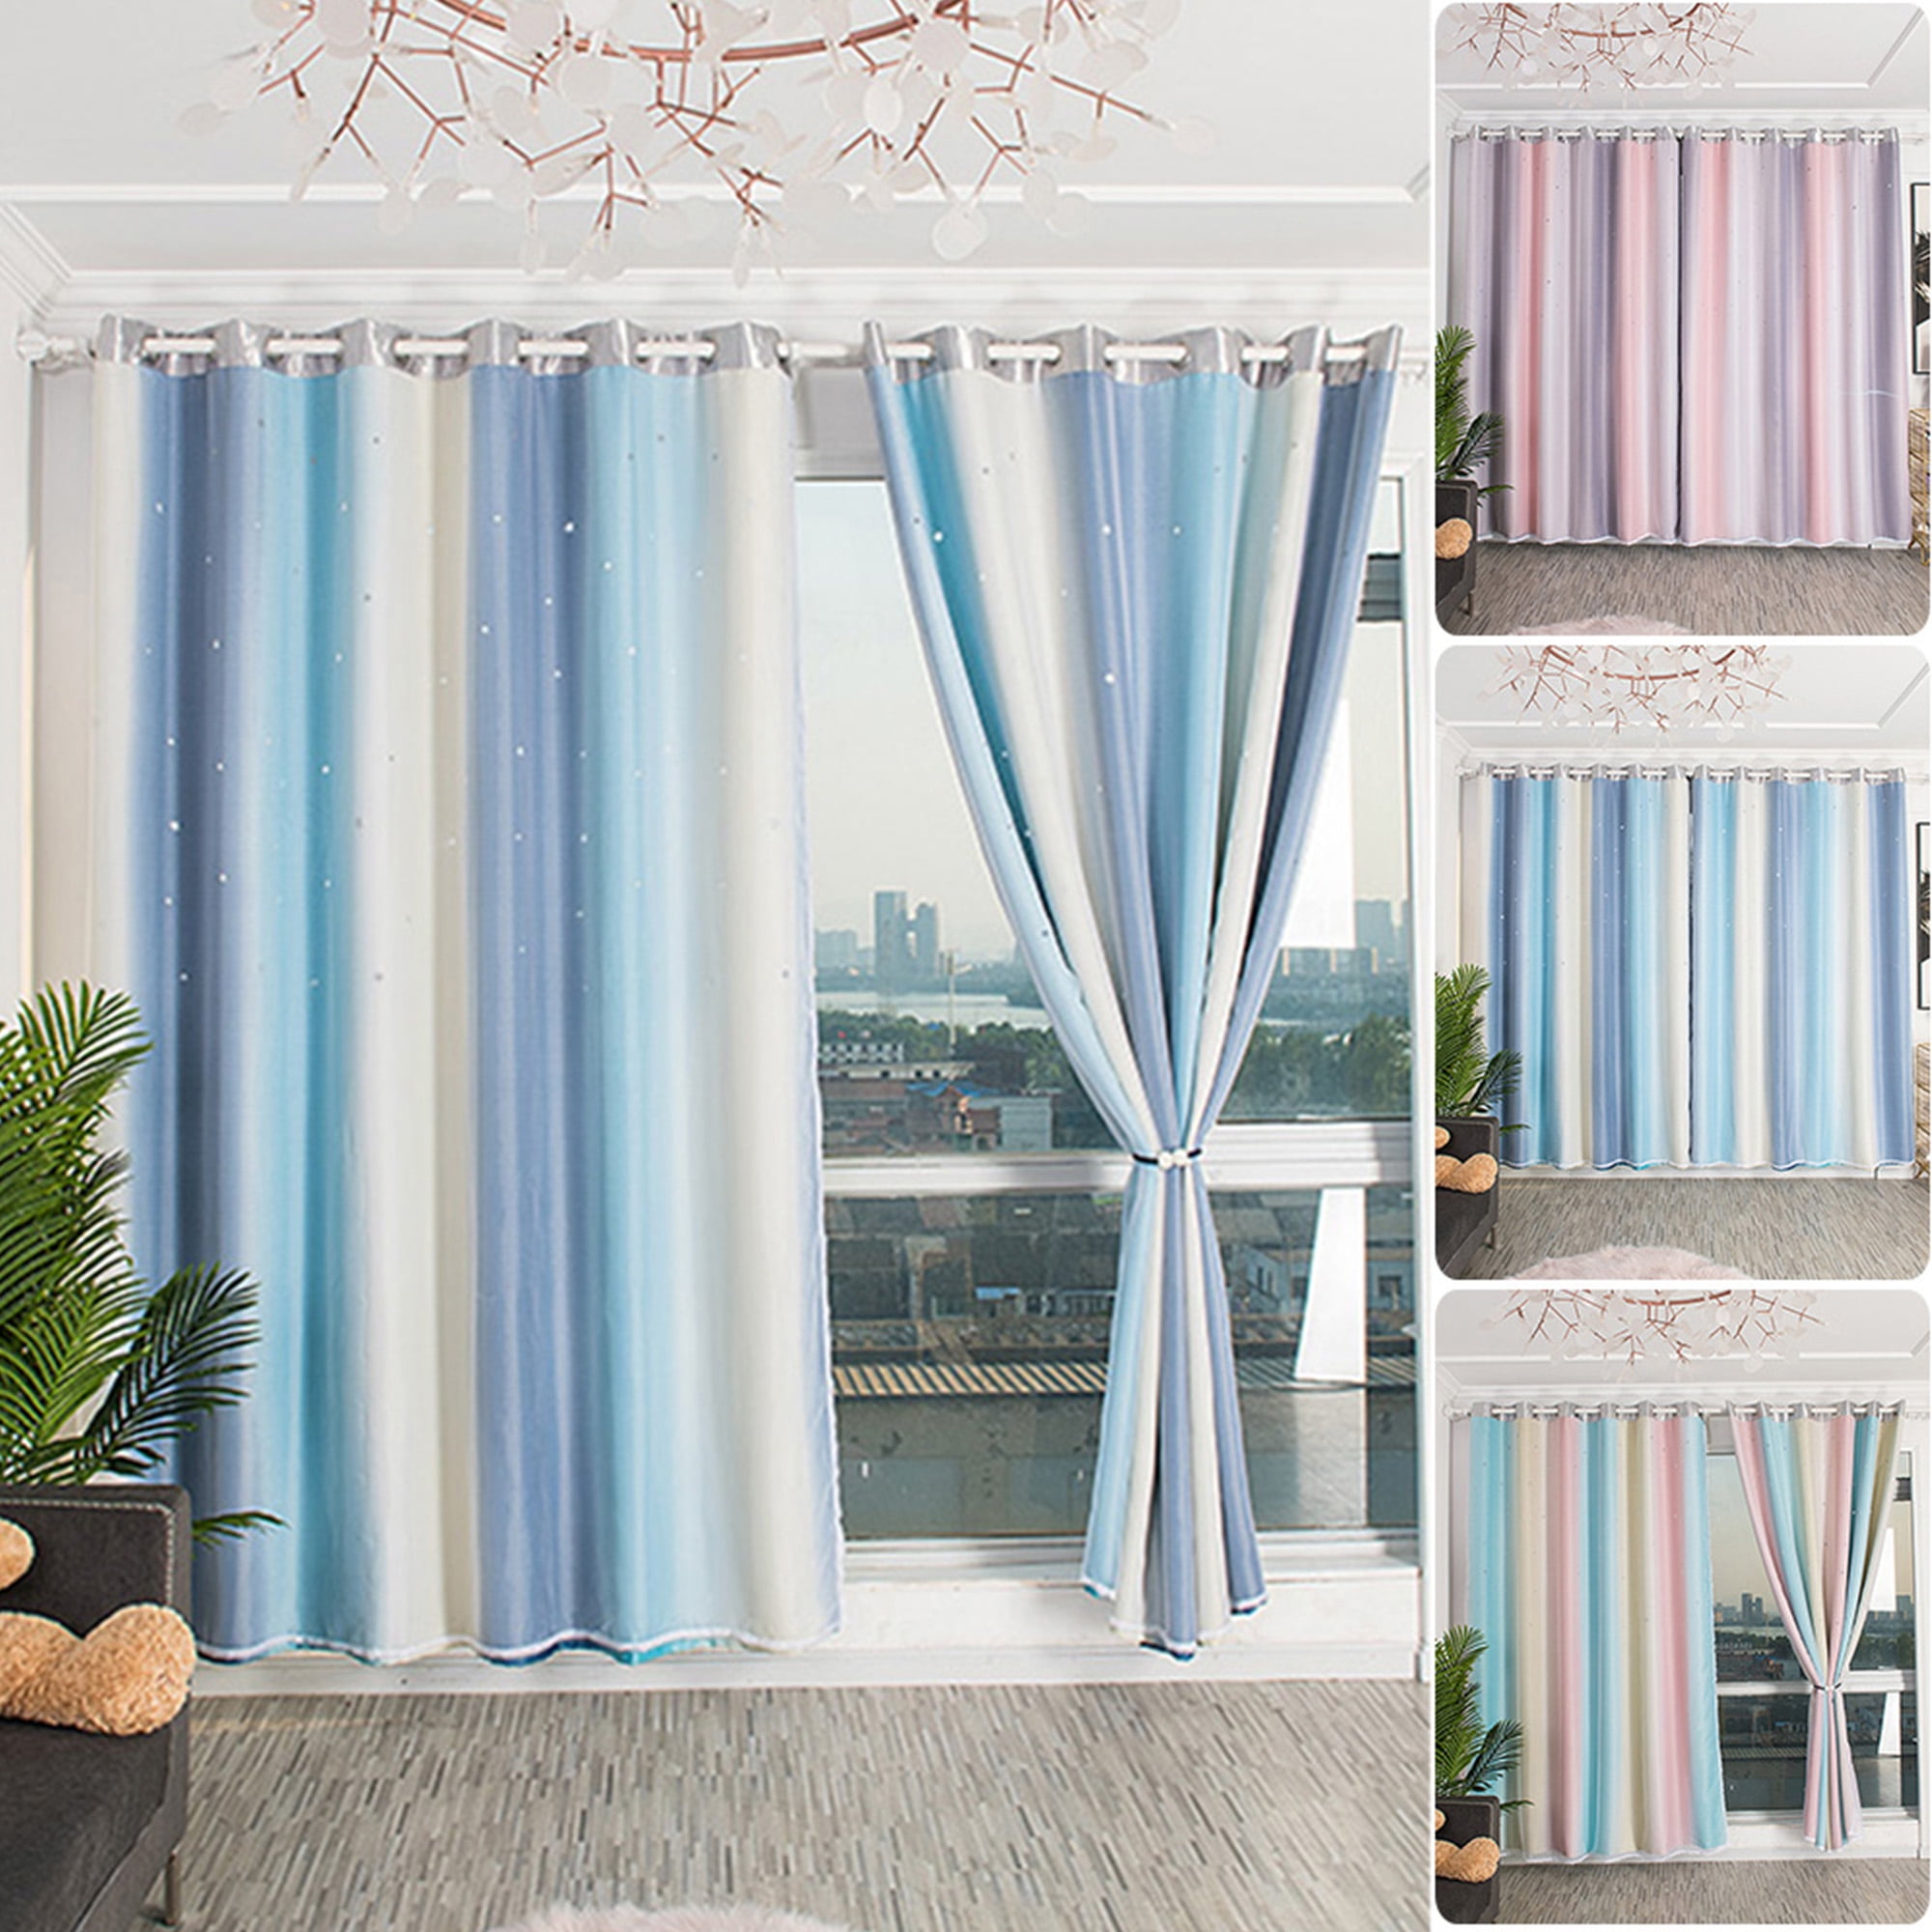 Eyelet Gradient 2 Layer Blackout Curtains + Mesh Starry Hollow-Out